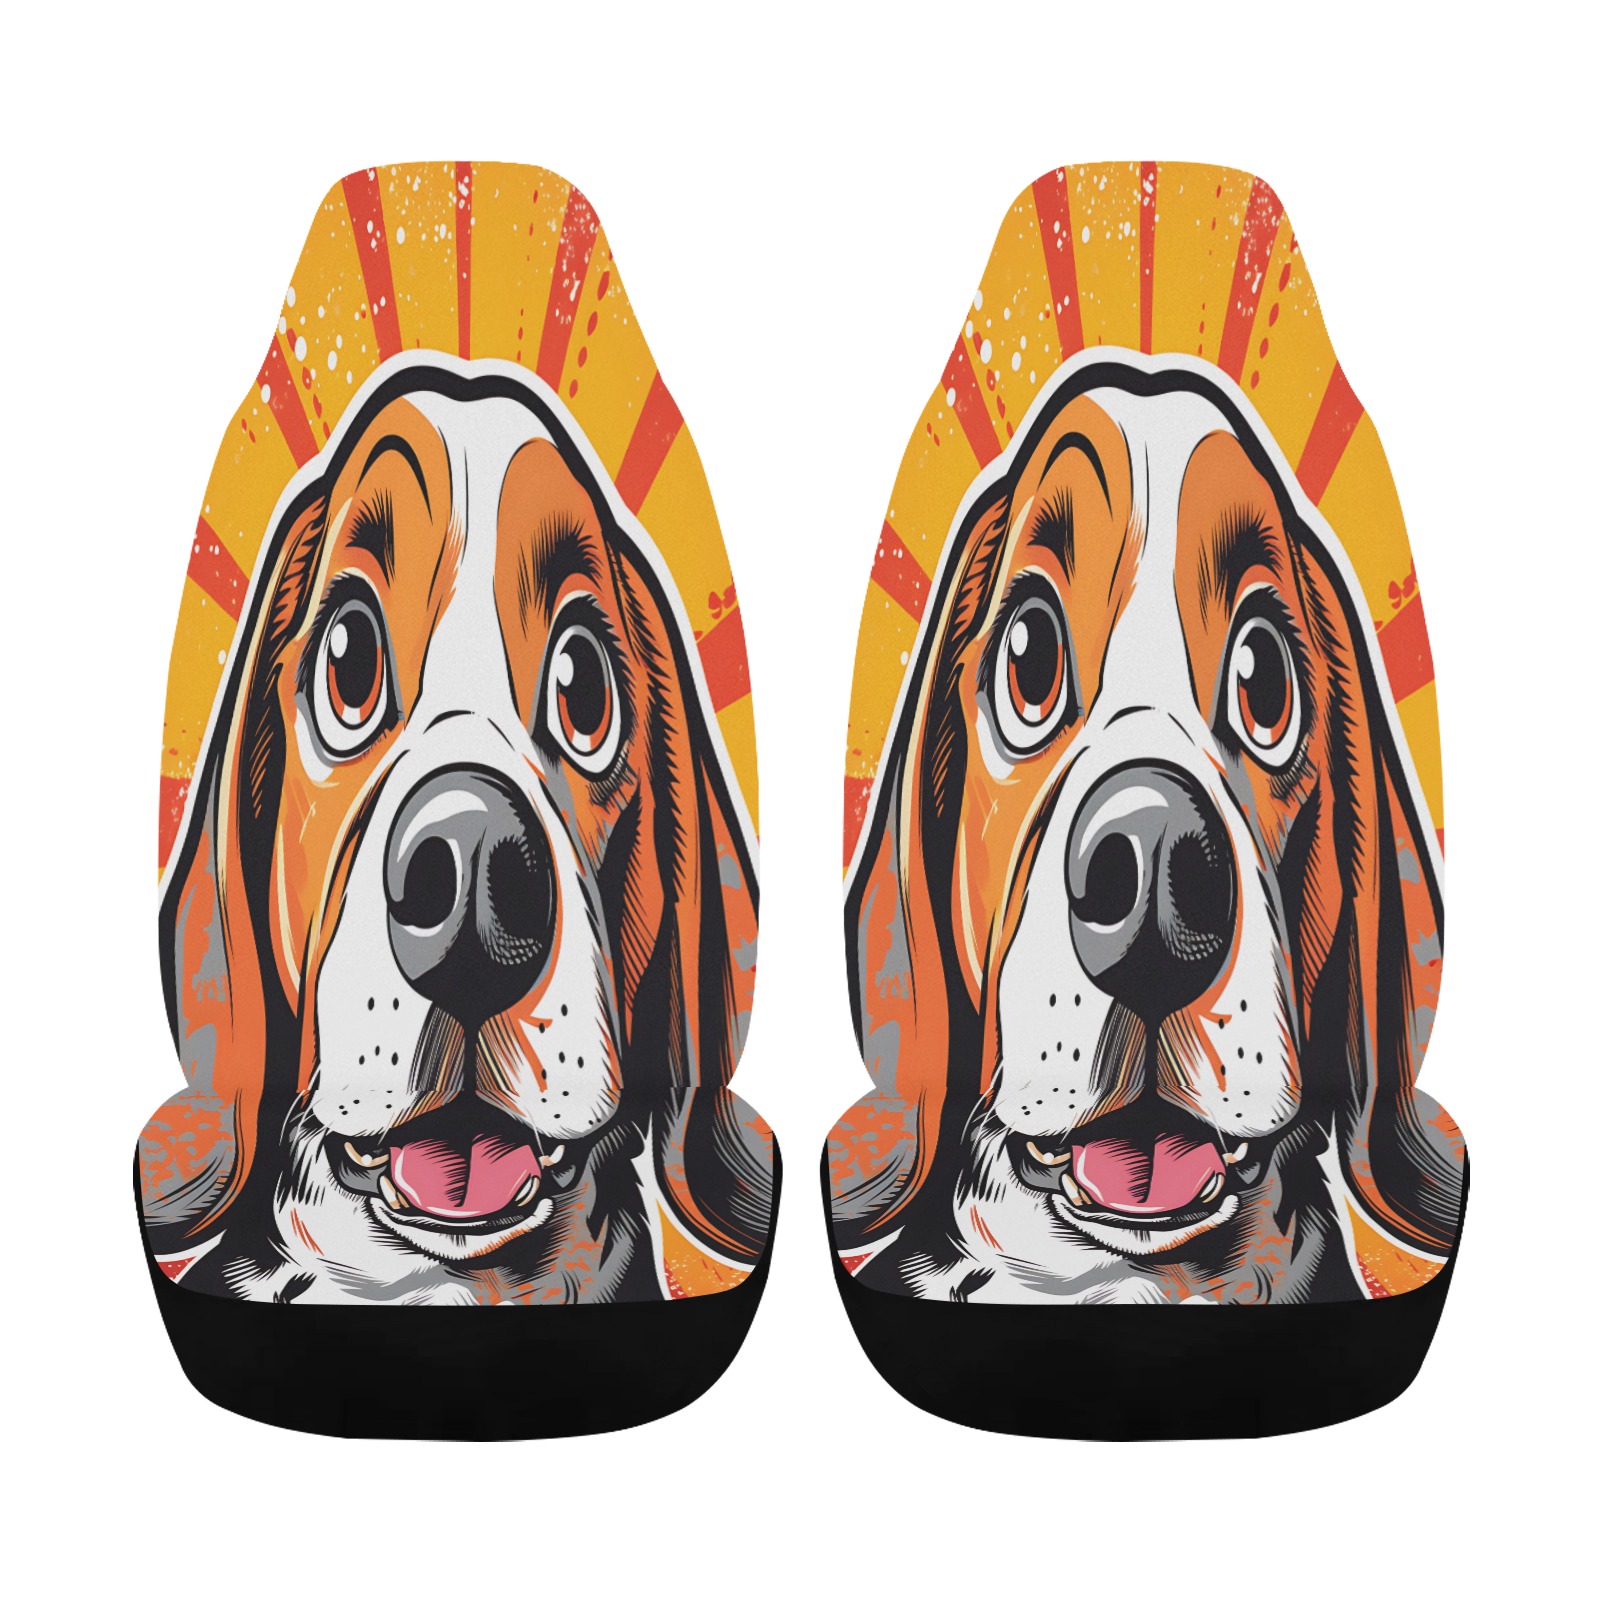 Beagle Pop Art Car Seat Cover Airbag Compatible (Set of 2)